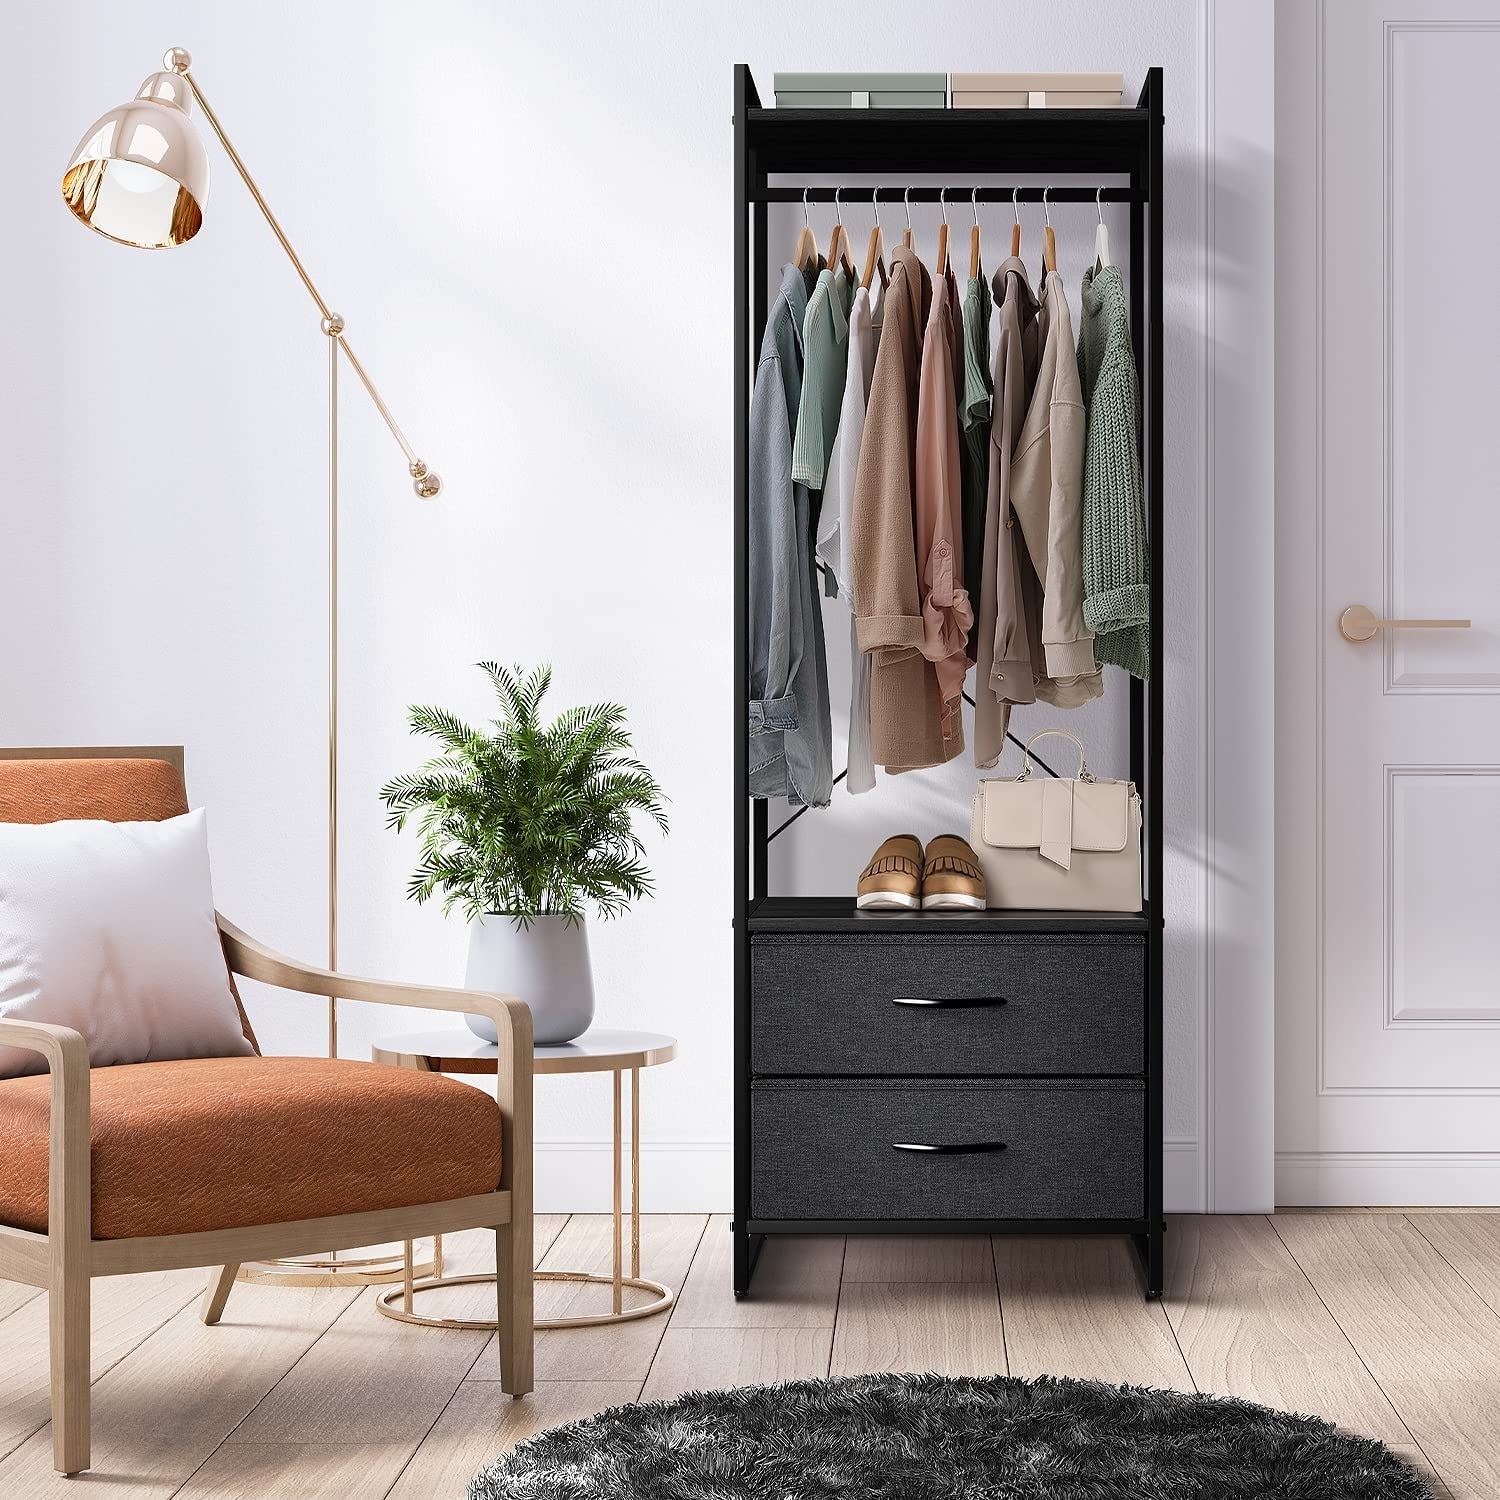 https://ak1.ostkcdn.com/images/products/is/images/direct/172dc1a958daaff81f84f98861d26c9474057237/Clothing-Rack-with-2-Drawers---Tall-Closet-Stand-Dresser-for-Bedroom.jpg